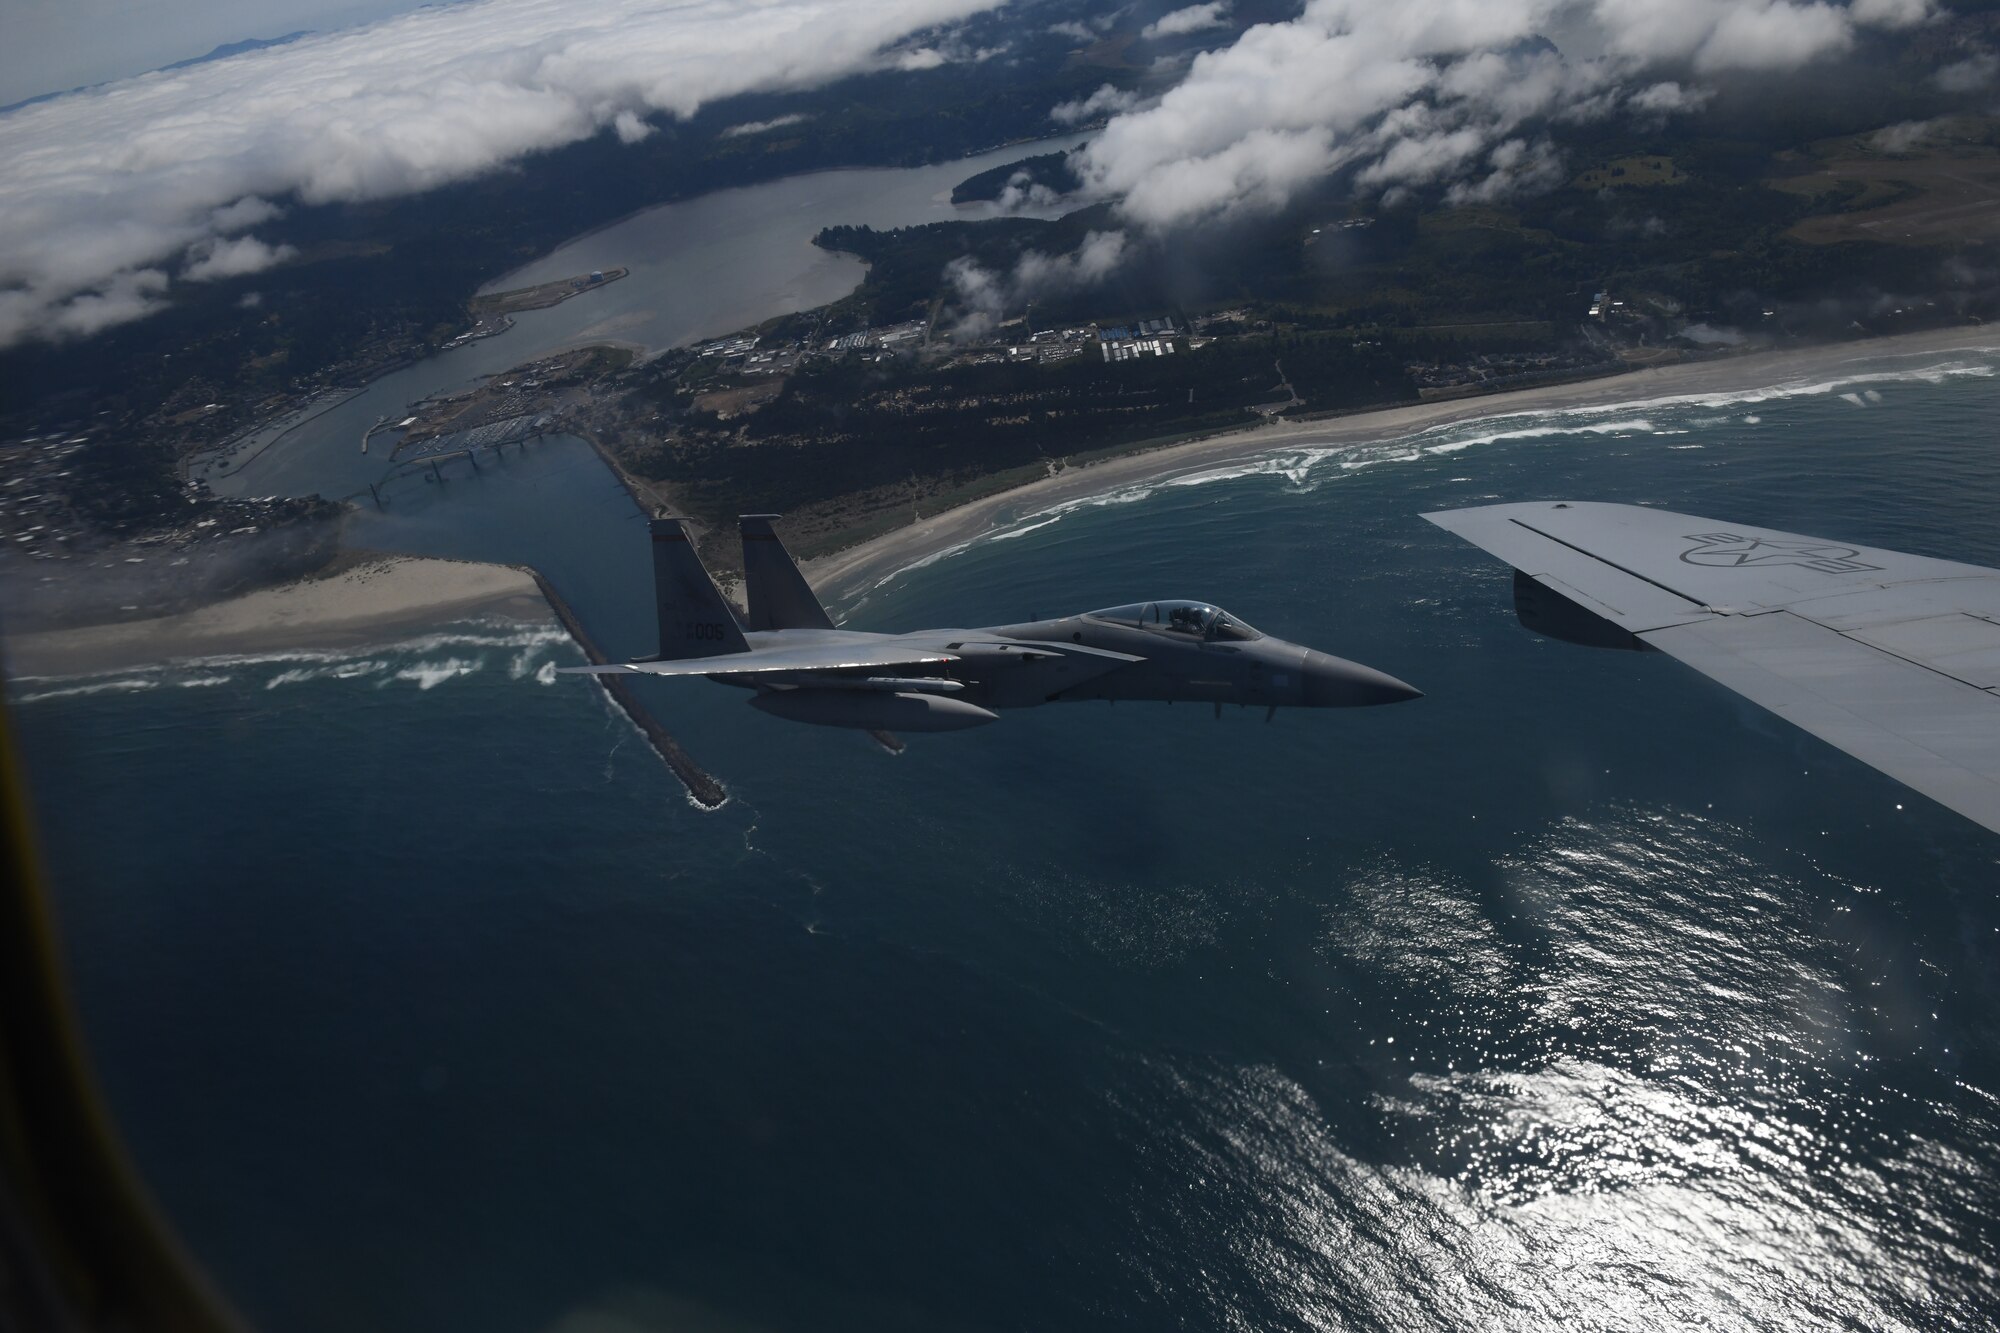 A U.S. Air Force F-15C Eagle from the 142nd Fighter Wing flies beside a KC-135 Stratotanker along the Oregon Coast after refueling during Operational Centennial Contact June 27, 2023. Operation Centennial Contact, a movement which included flights over Yellowstone National Park, Mount Rushmore and Glacier National Park, was part of Air Mobility Command’s celebration of 100 years air refueling operations and demonstrated the 92nd Air Refueling Wing’s global reach capabilities. This capability is essential for strategic and tactical operations, as well as humanitarian relief efforts in support of AMC, U.S. Transportation Command and Department of Defense priorities (U.S. Air Force Photo by 1st Lt. Ariana Wilkinson)